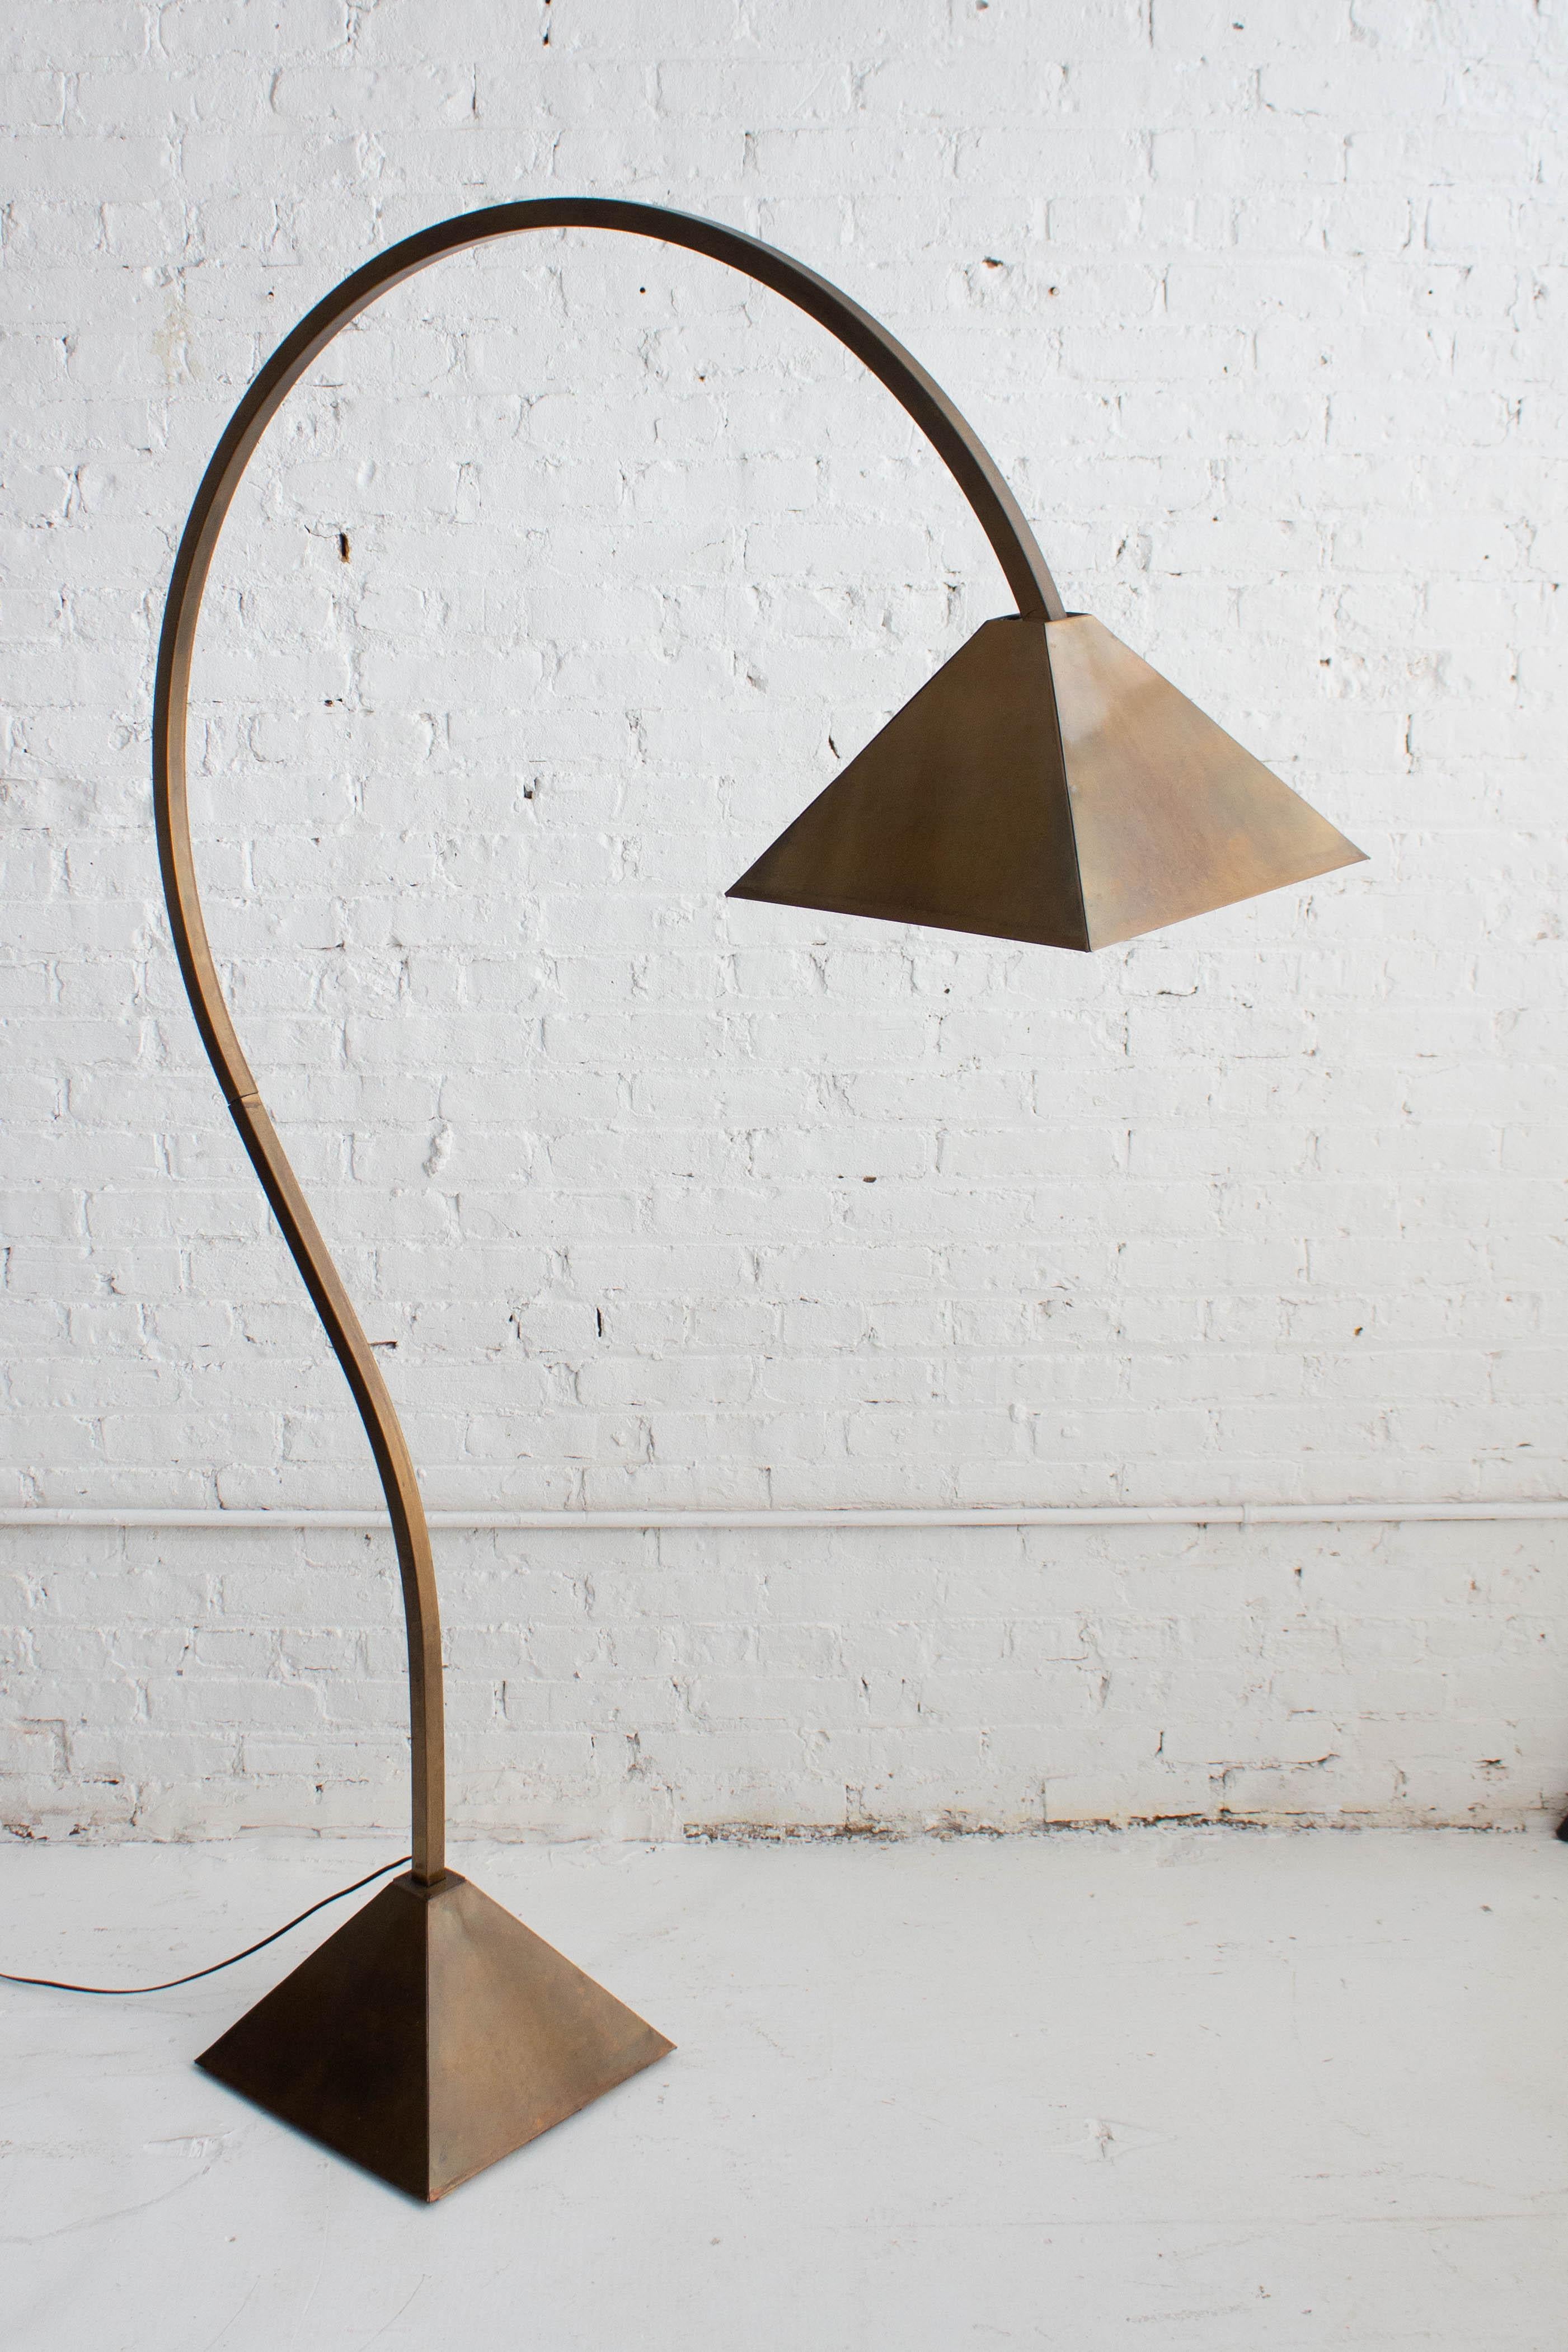 A mid century brass arc floor lamp. Richly burnished brass finish. Angular pyramid base and shade. Evident details of the makers hand can be seen throughout. Base is constructed of a concrete weight to support the arc structure. Sheet brass cap